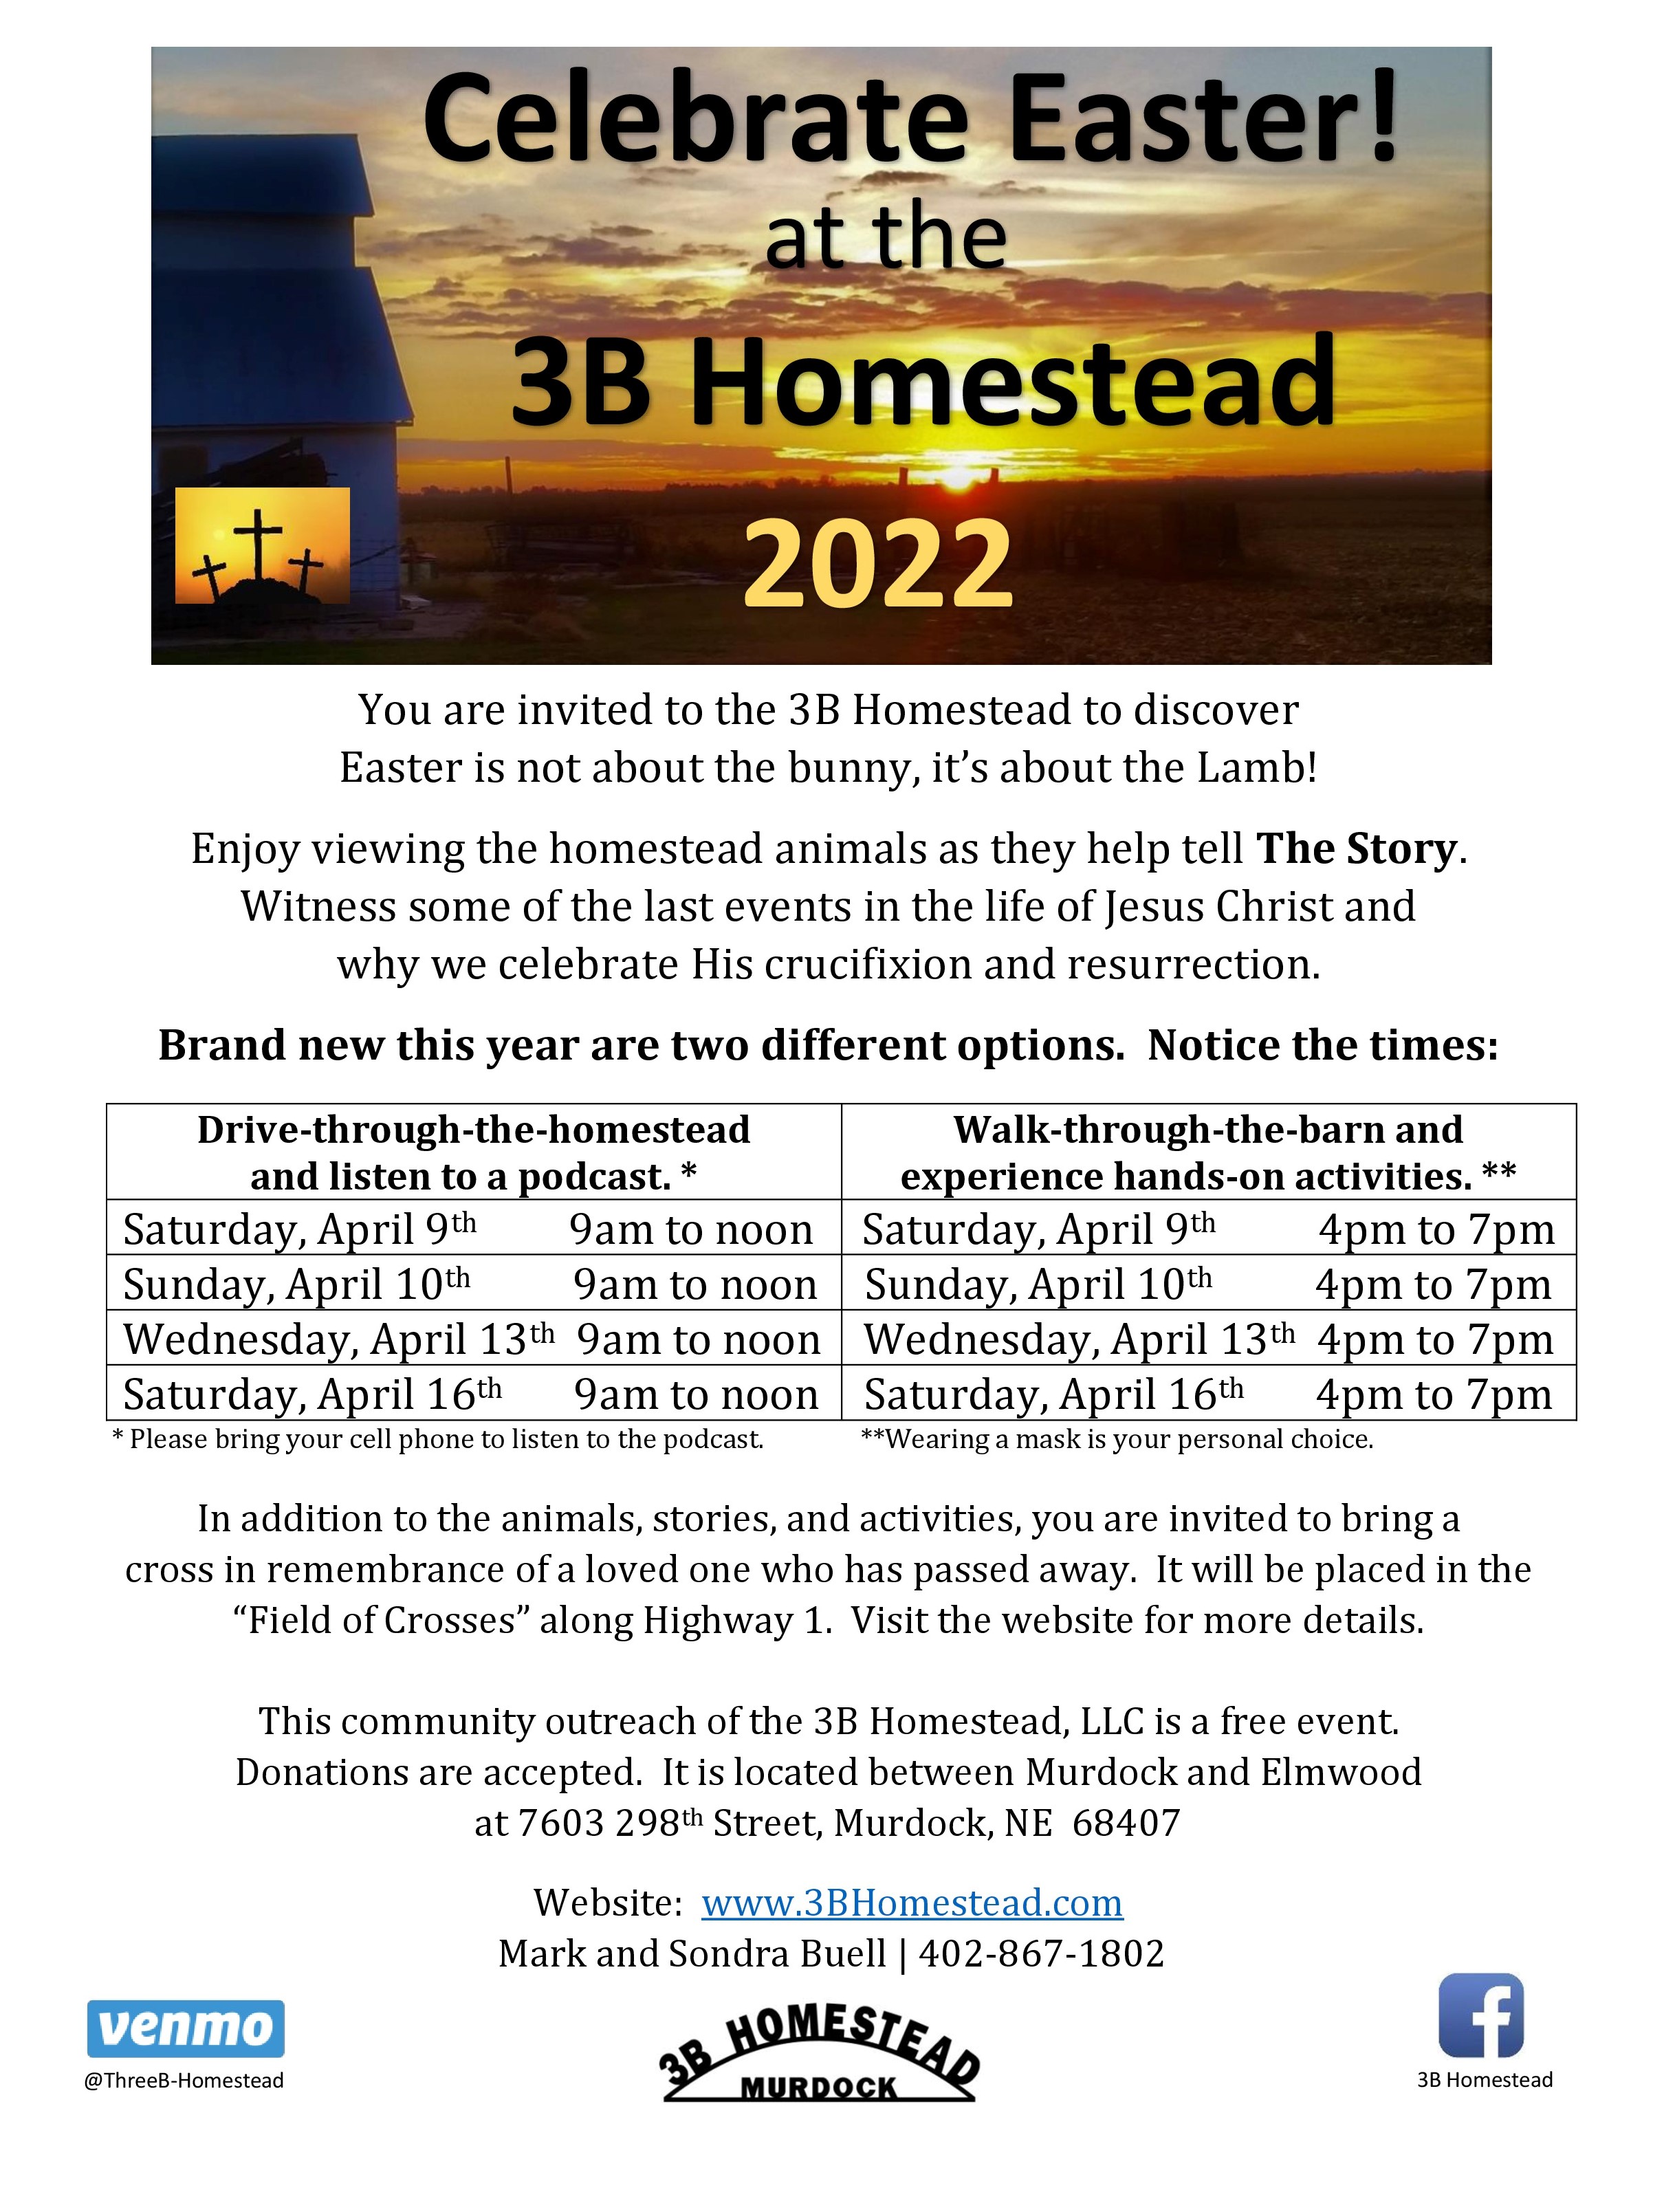 Celebrate Easter 2022 at The 3B Homestead